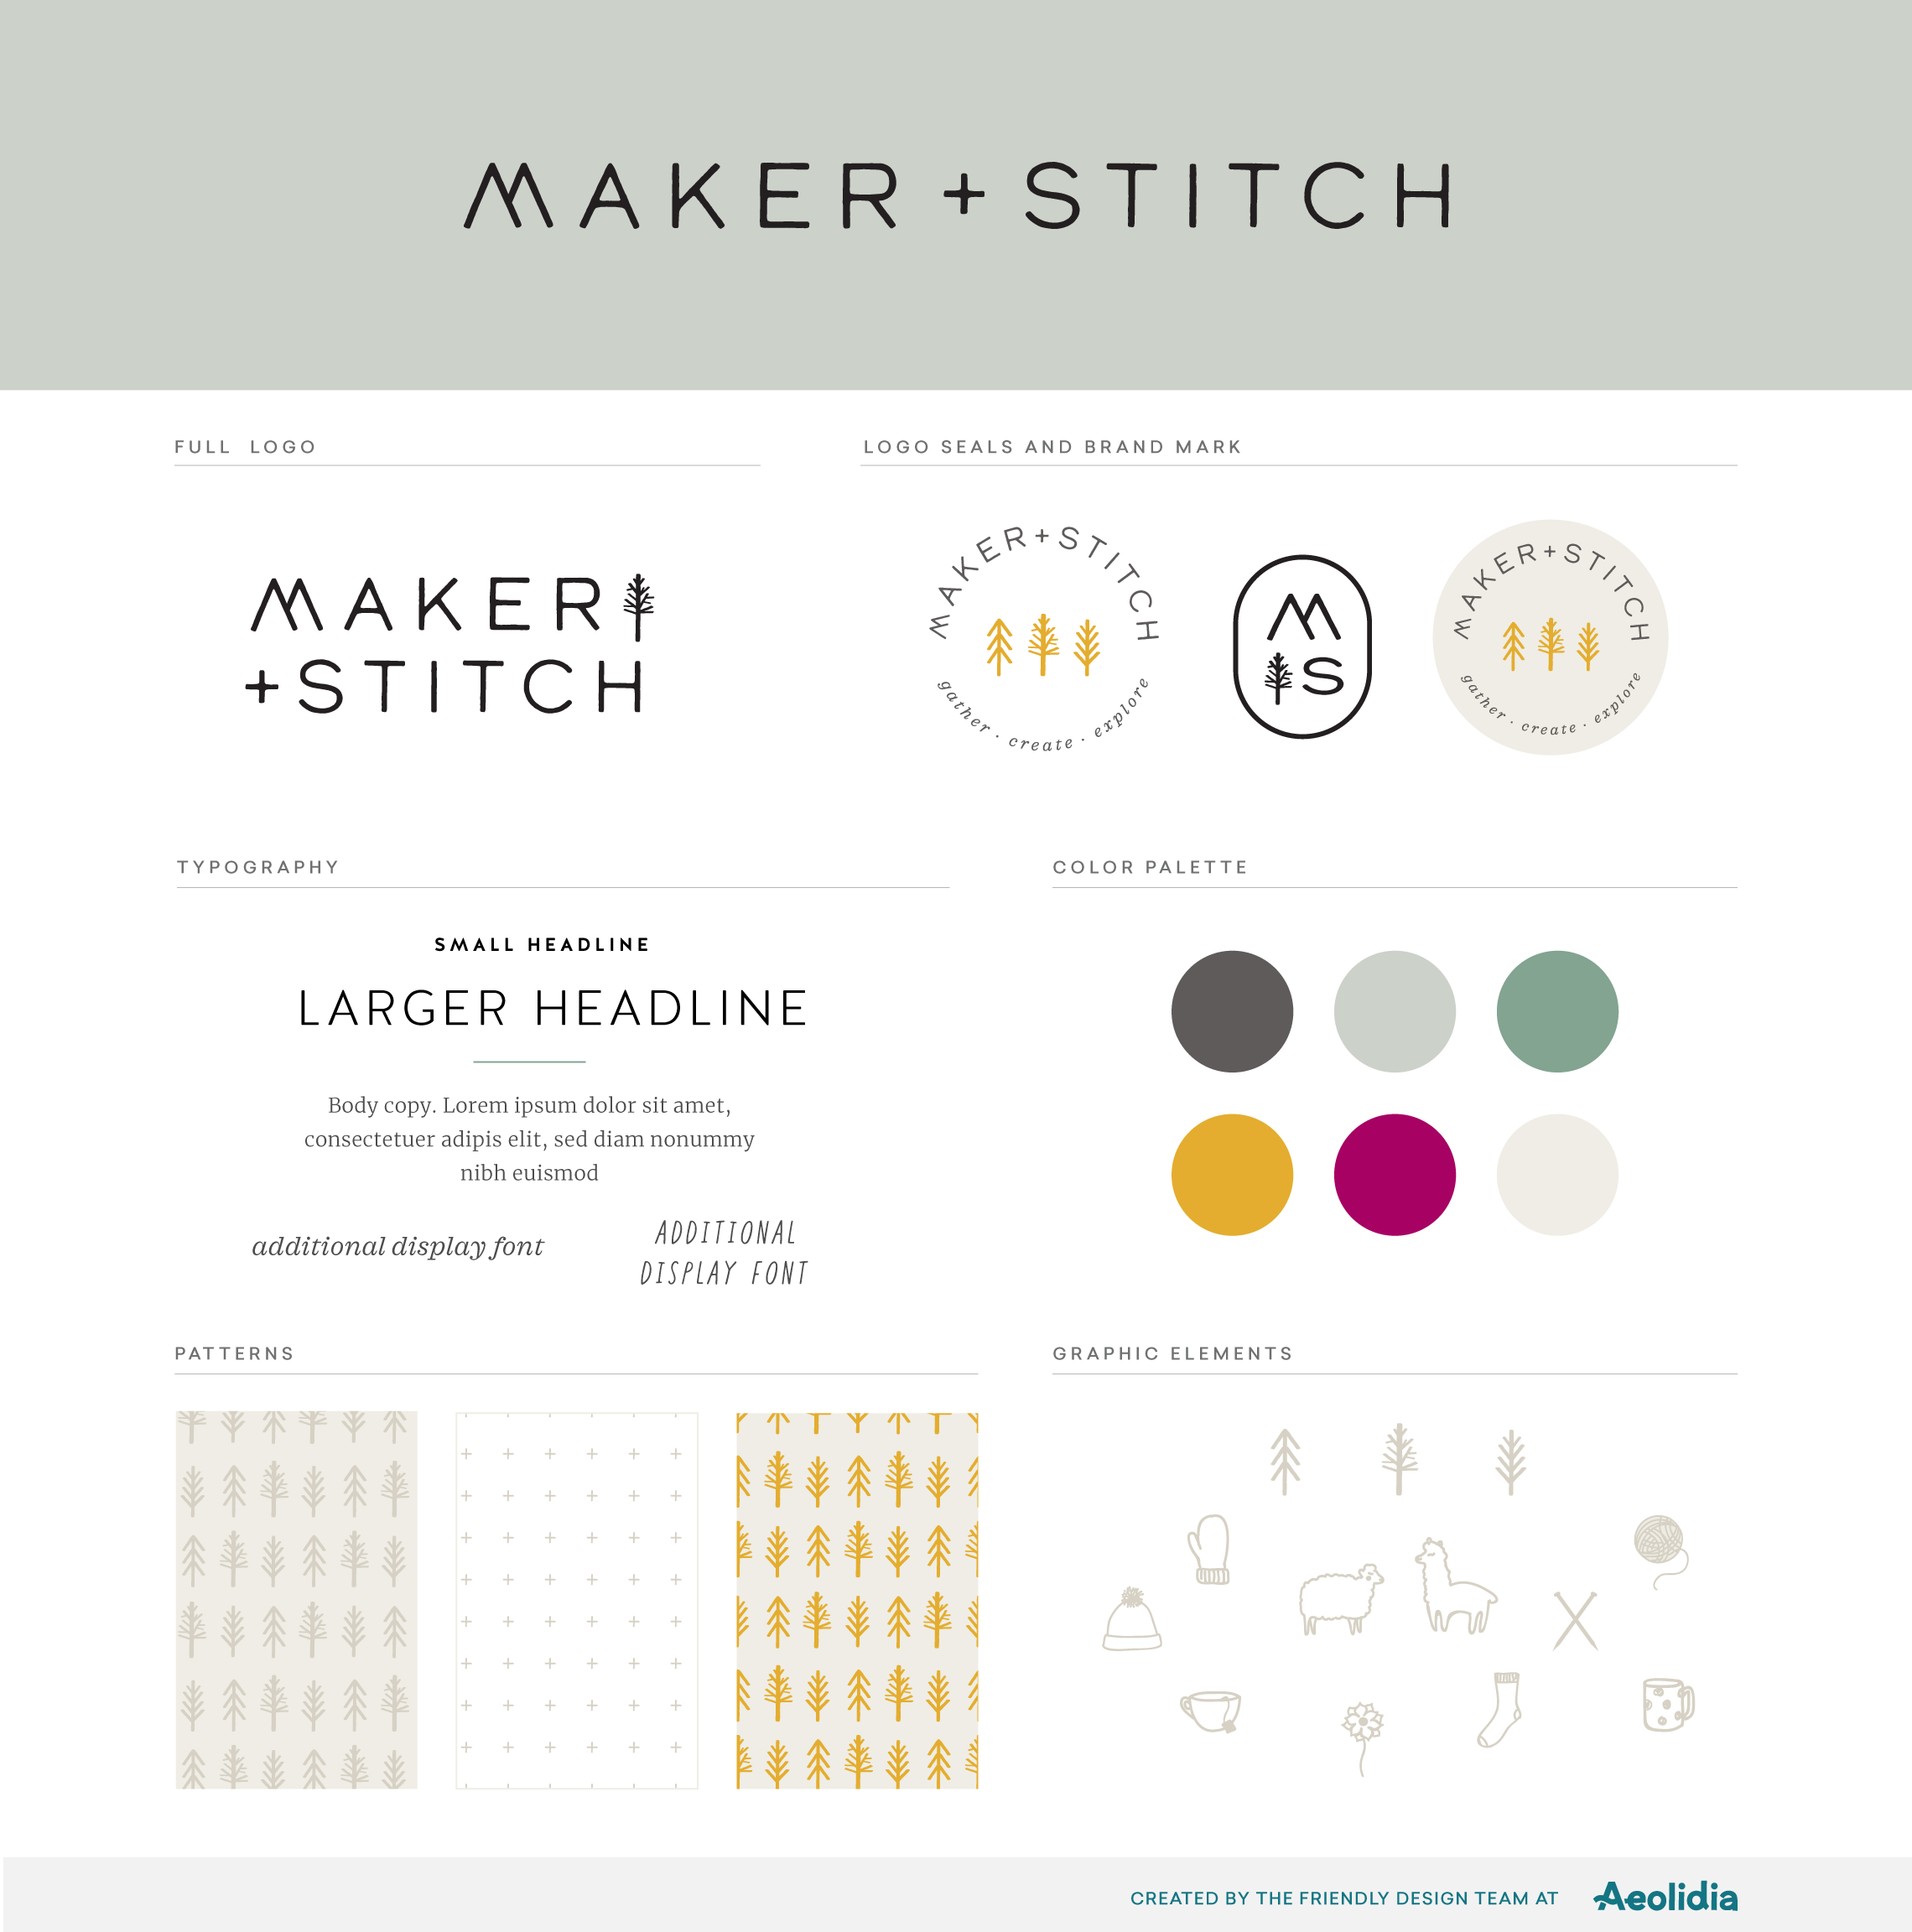 Maker + Stitch - brand styleguide for a brick and mortar knitting shop.